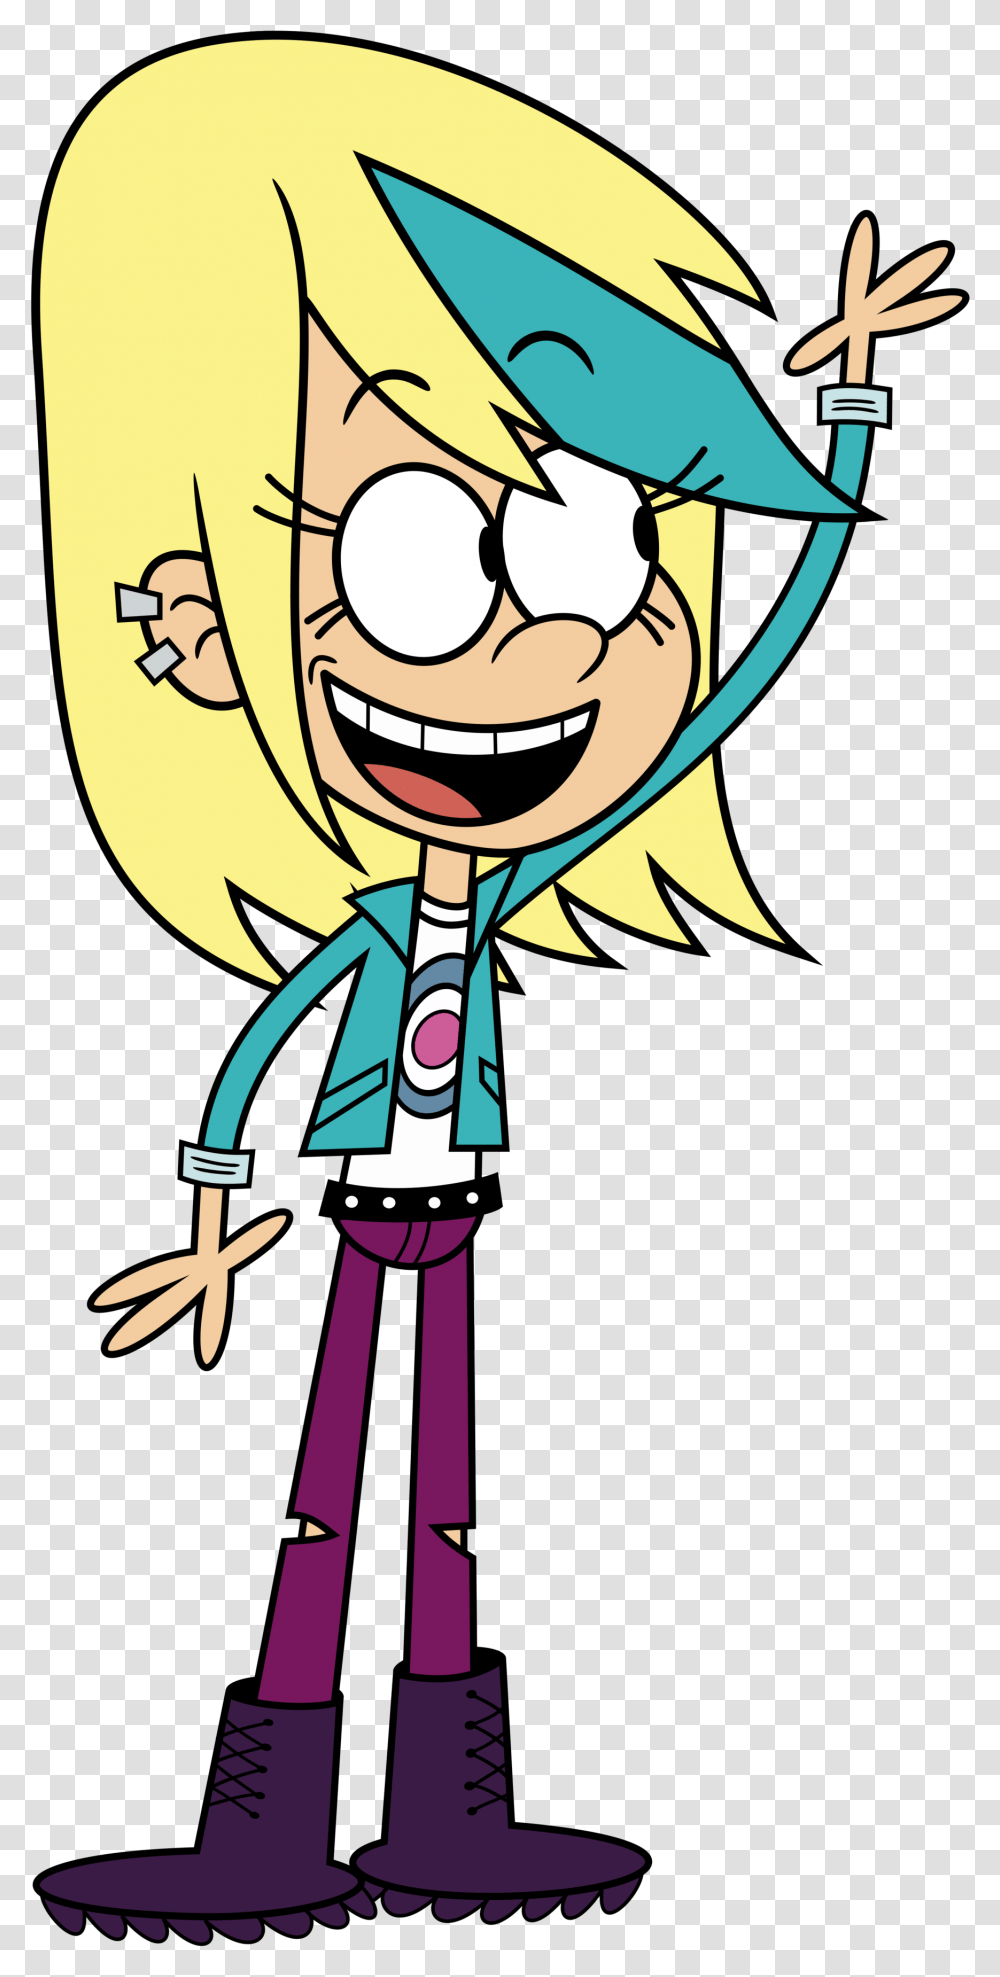 The Loud House Character Sam Sharp Waving Loud House Upcoming Episodes, Performer, Drawing Transparent Png